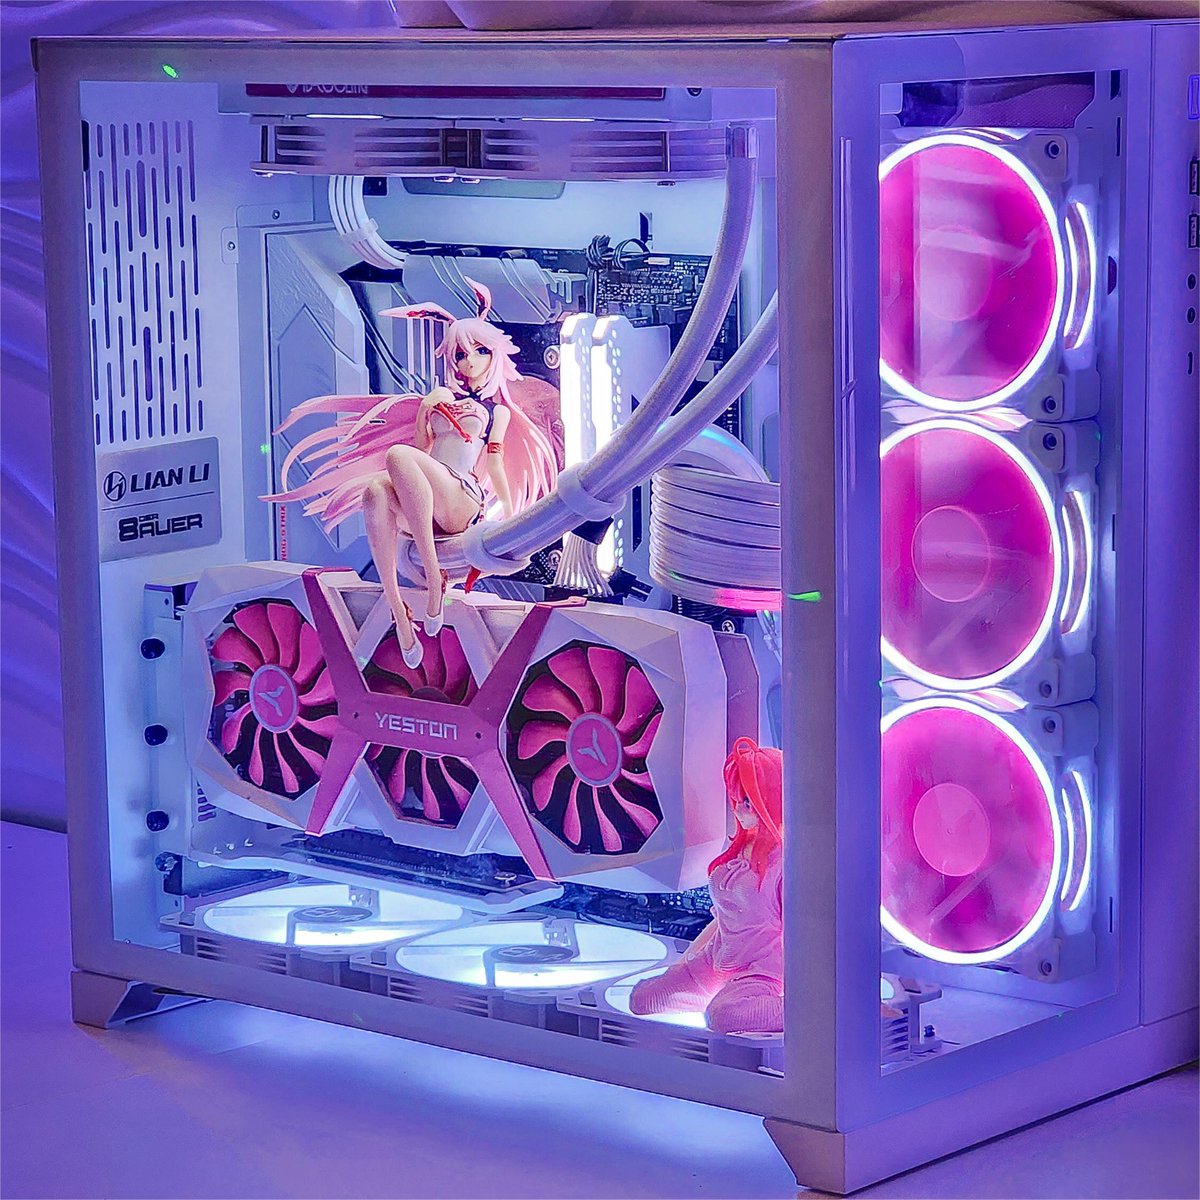 💕Discontinued, but still turning heads💕This Pink and White Graphics Card is here to make your setup pop! 
.
GPU: YESTON RX 5700 XT Game Ace
📷：alejandrogramgaming from Reddit
.
#yeston #graphicscard #gpu #hardware #pcbuild #gamingsetup #animesetup #pinksetup #gameace